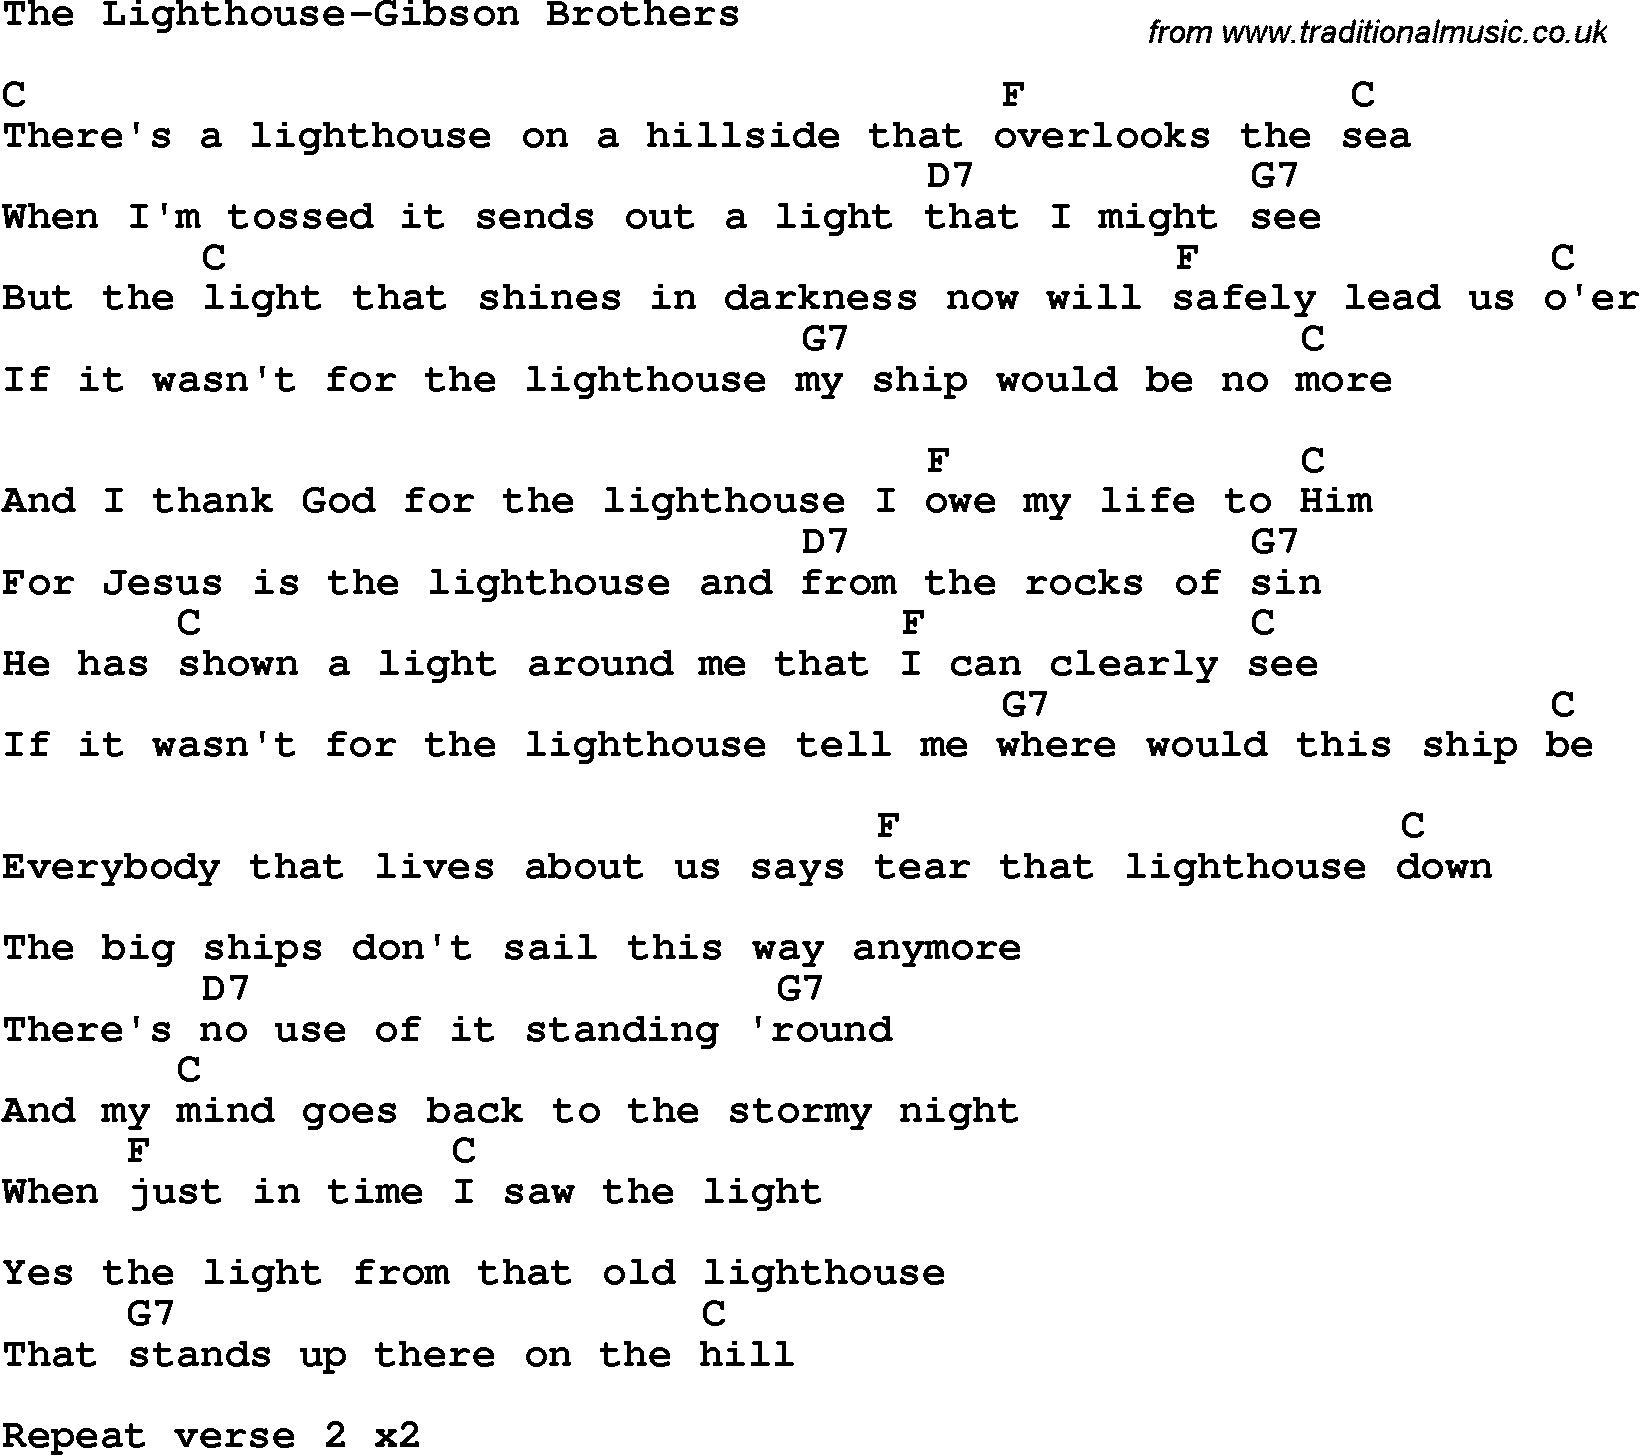 Country, Southern and Bluegrass Gospel Song The Lighthouse-Gibson Brothers lyrics and chords